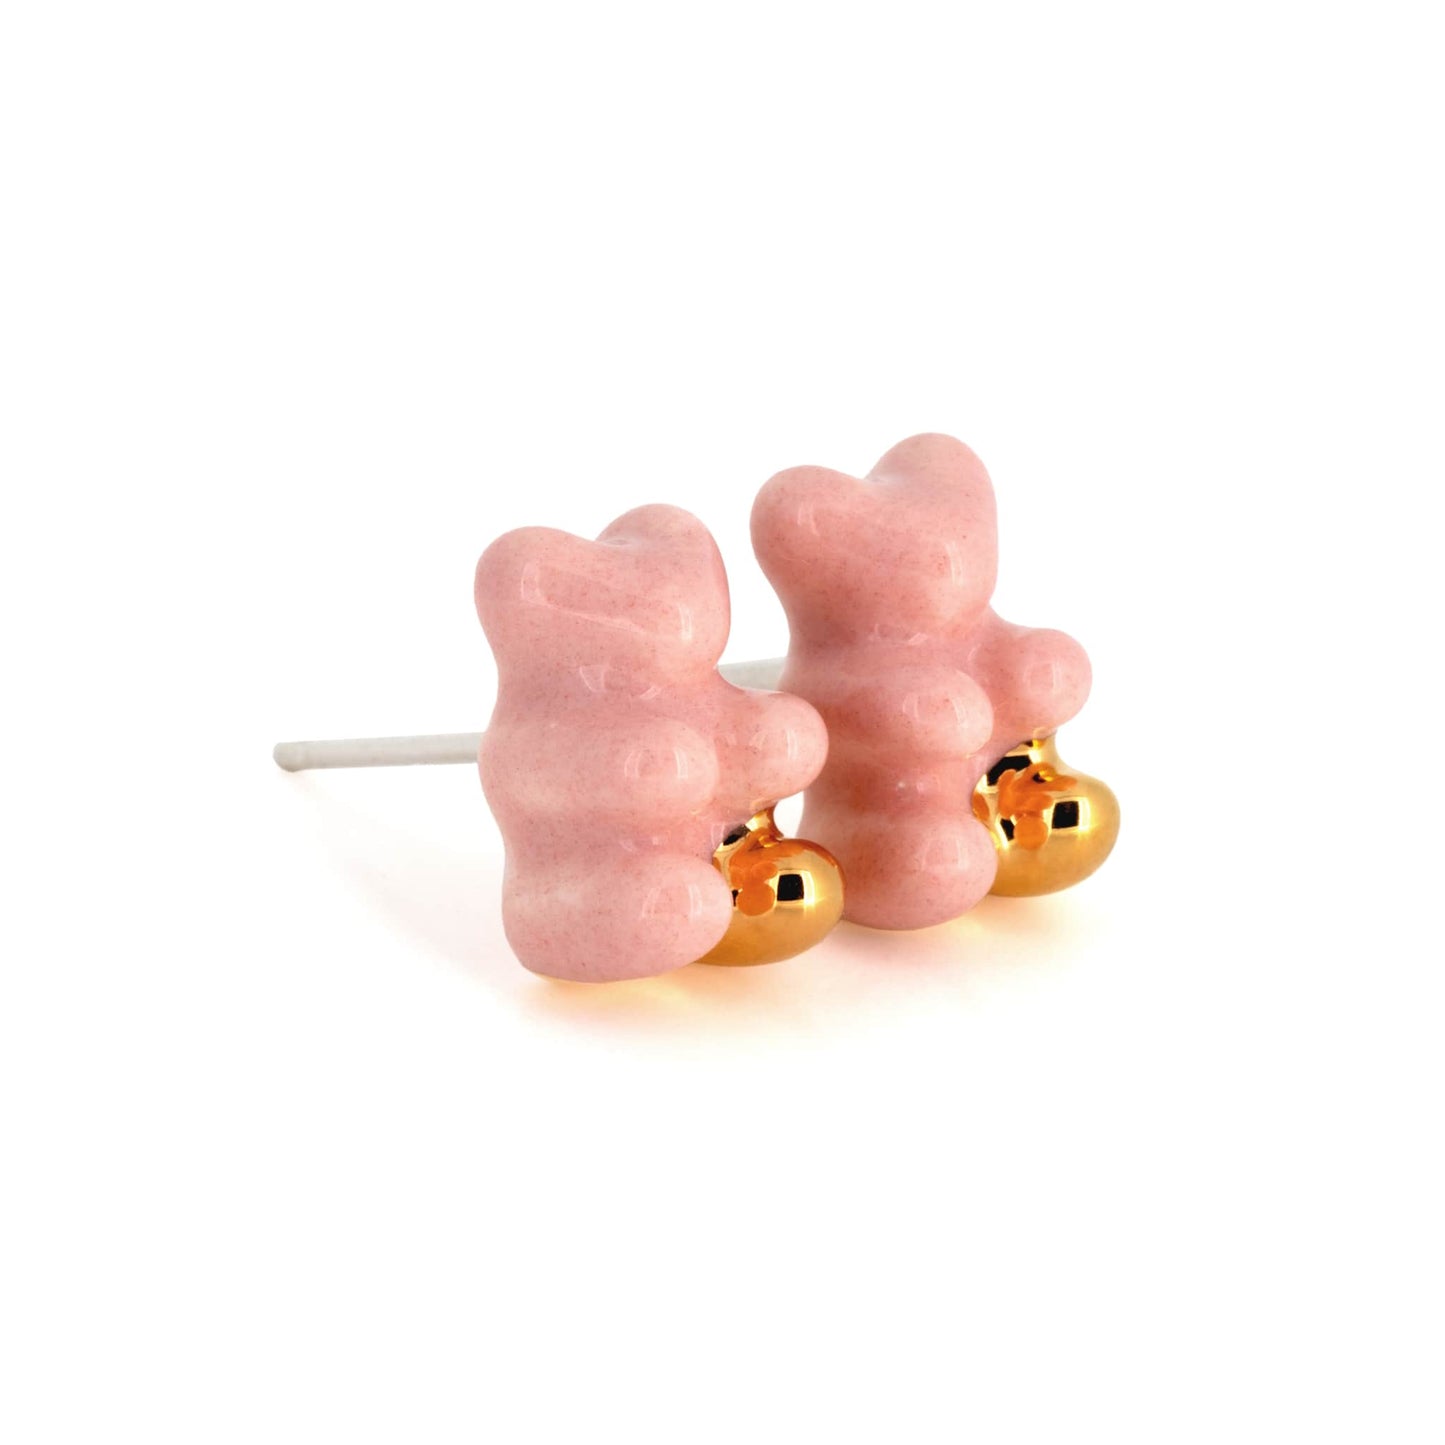 Pink Gummy Bear Stud Earrings With Gold